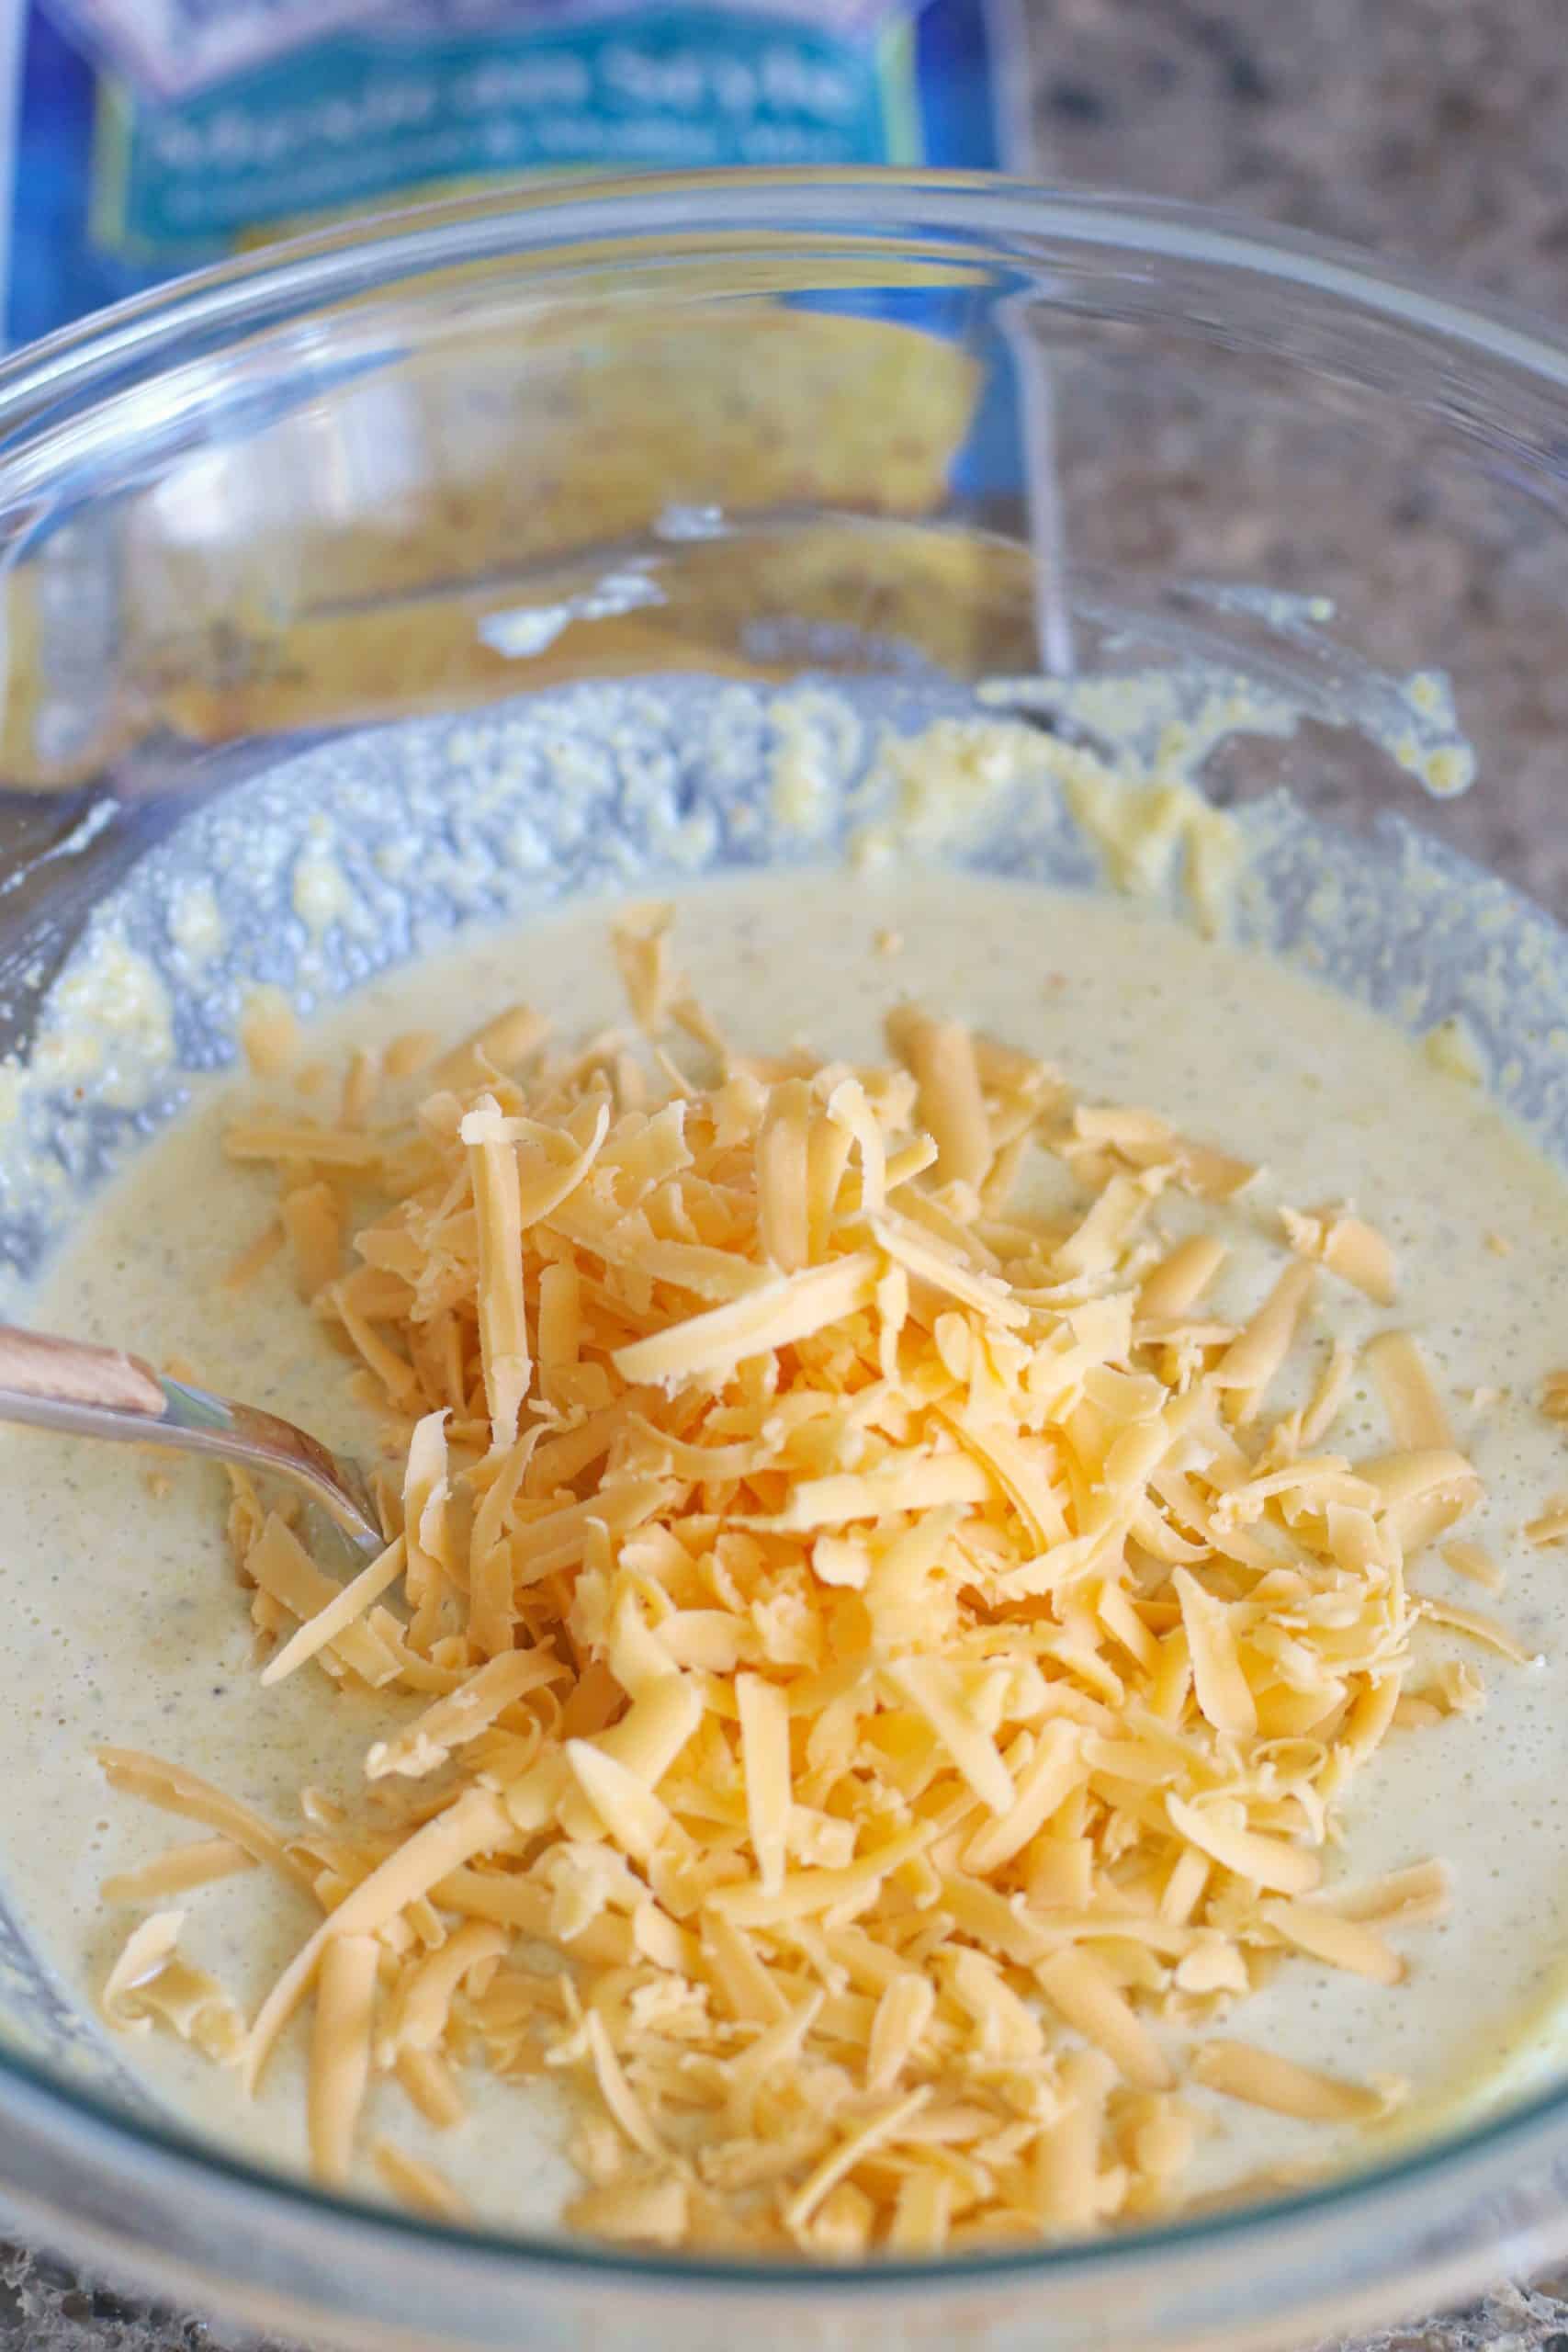 shredded sharp cheddar cheese added to Mexican cornbread batter in a large bowl.